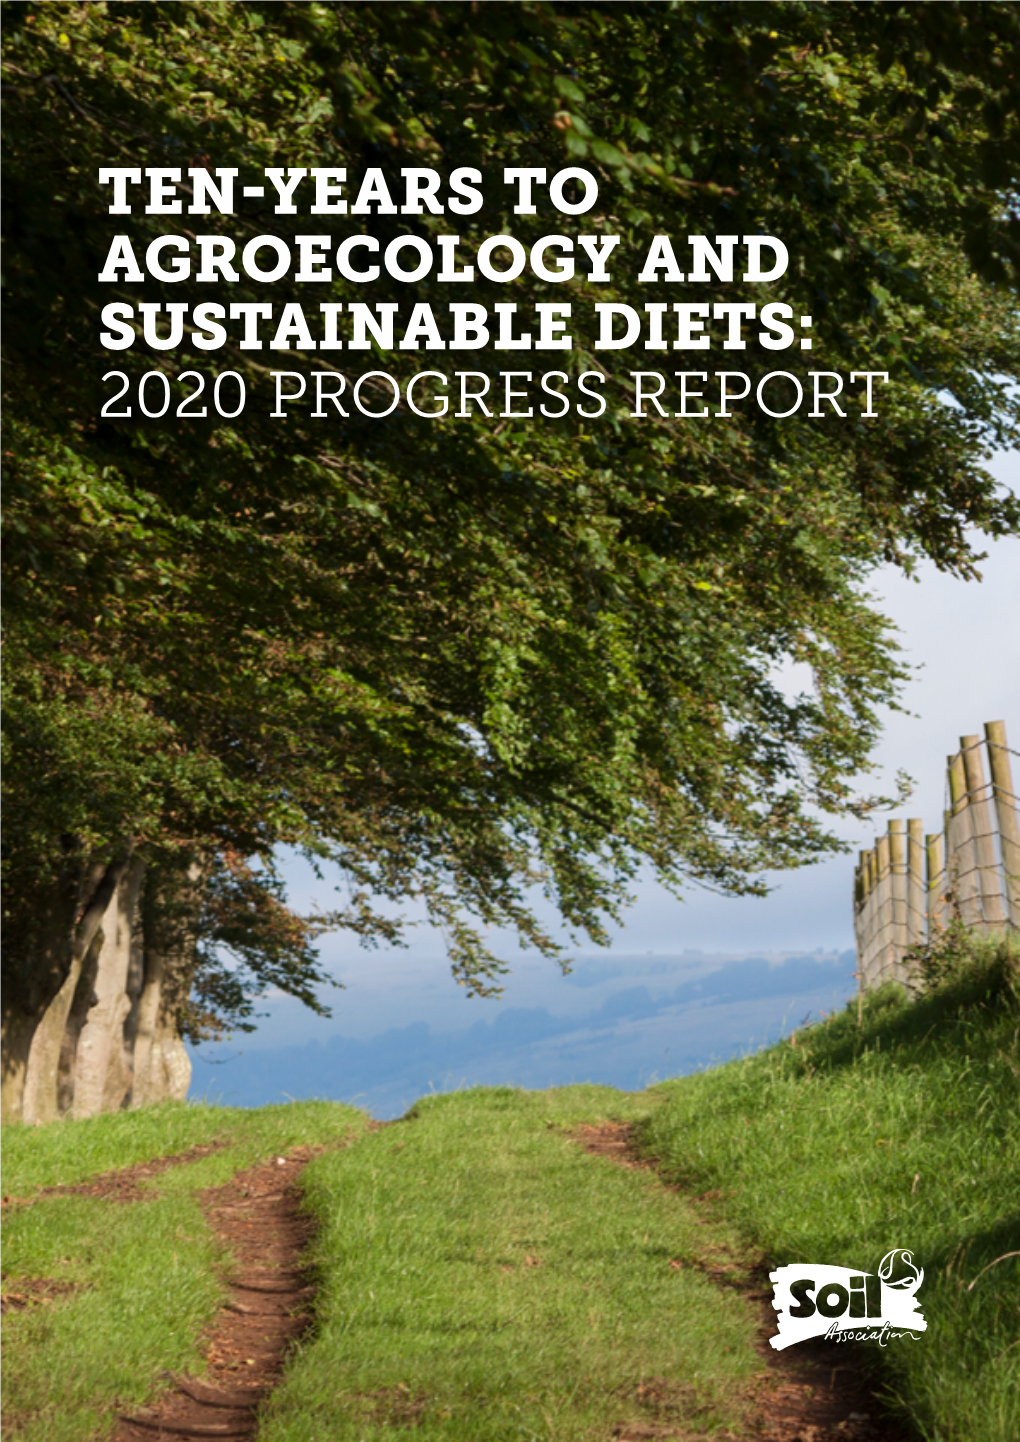 Ten-Years to Agroecology and Sustainable Diets: 2020 Progress Report